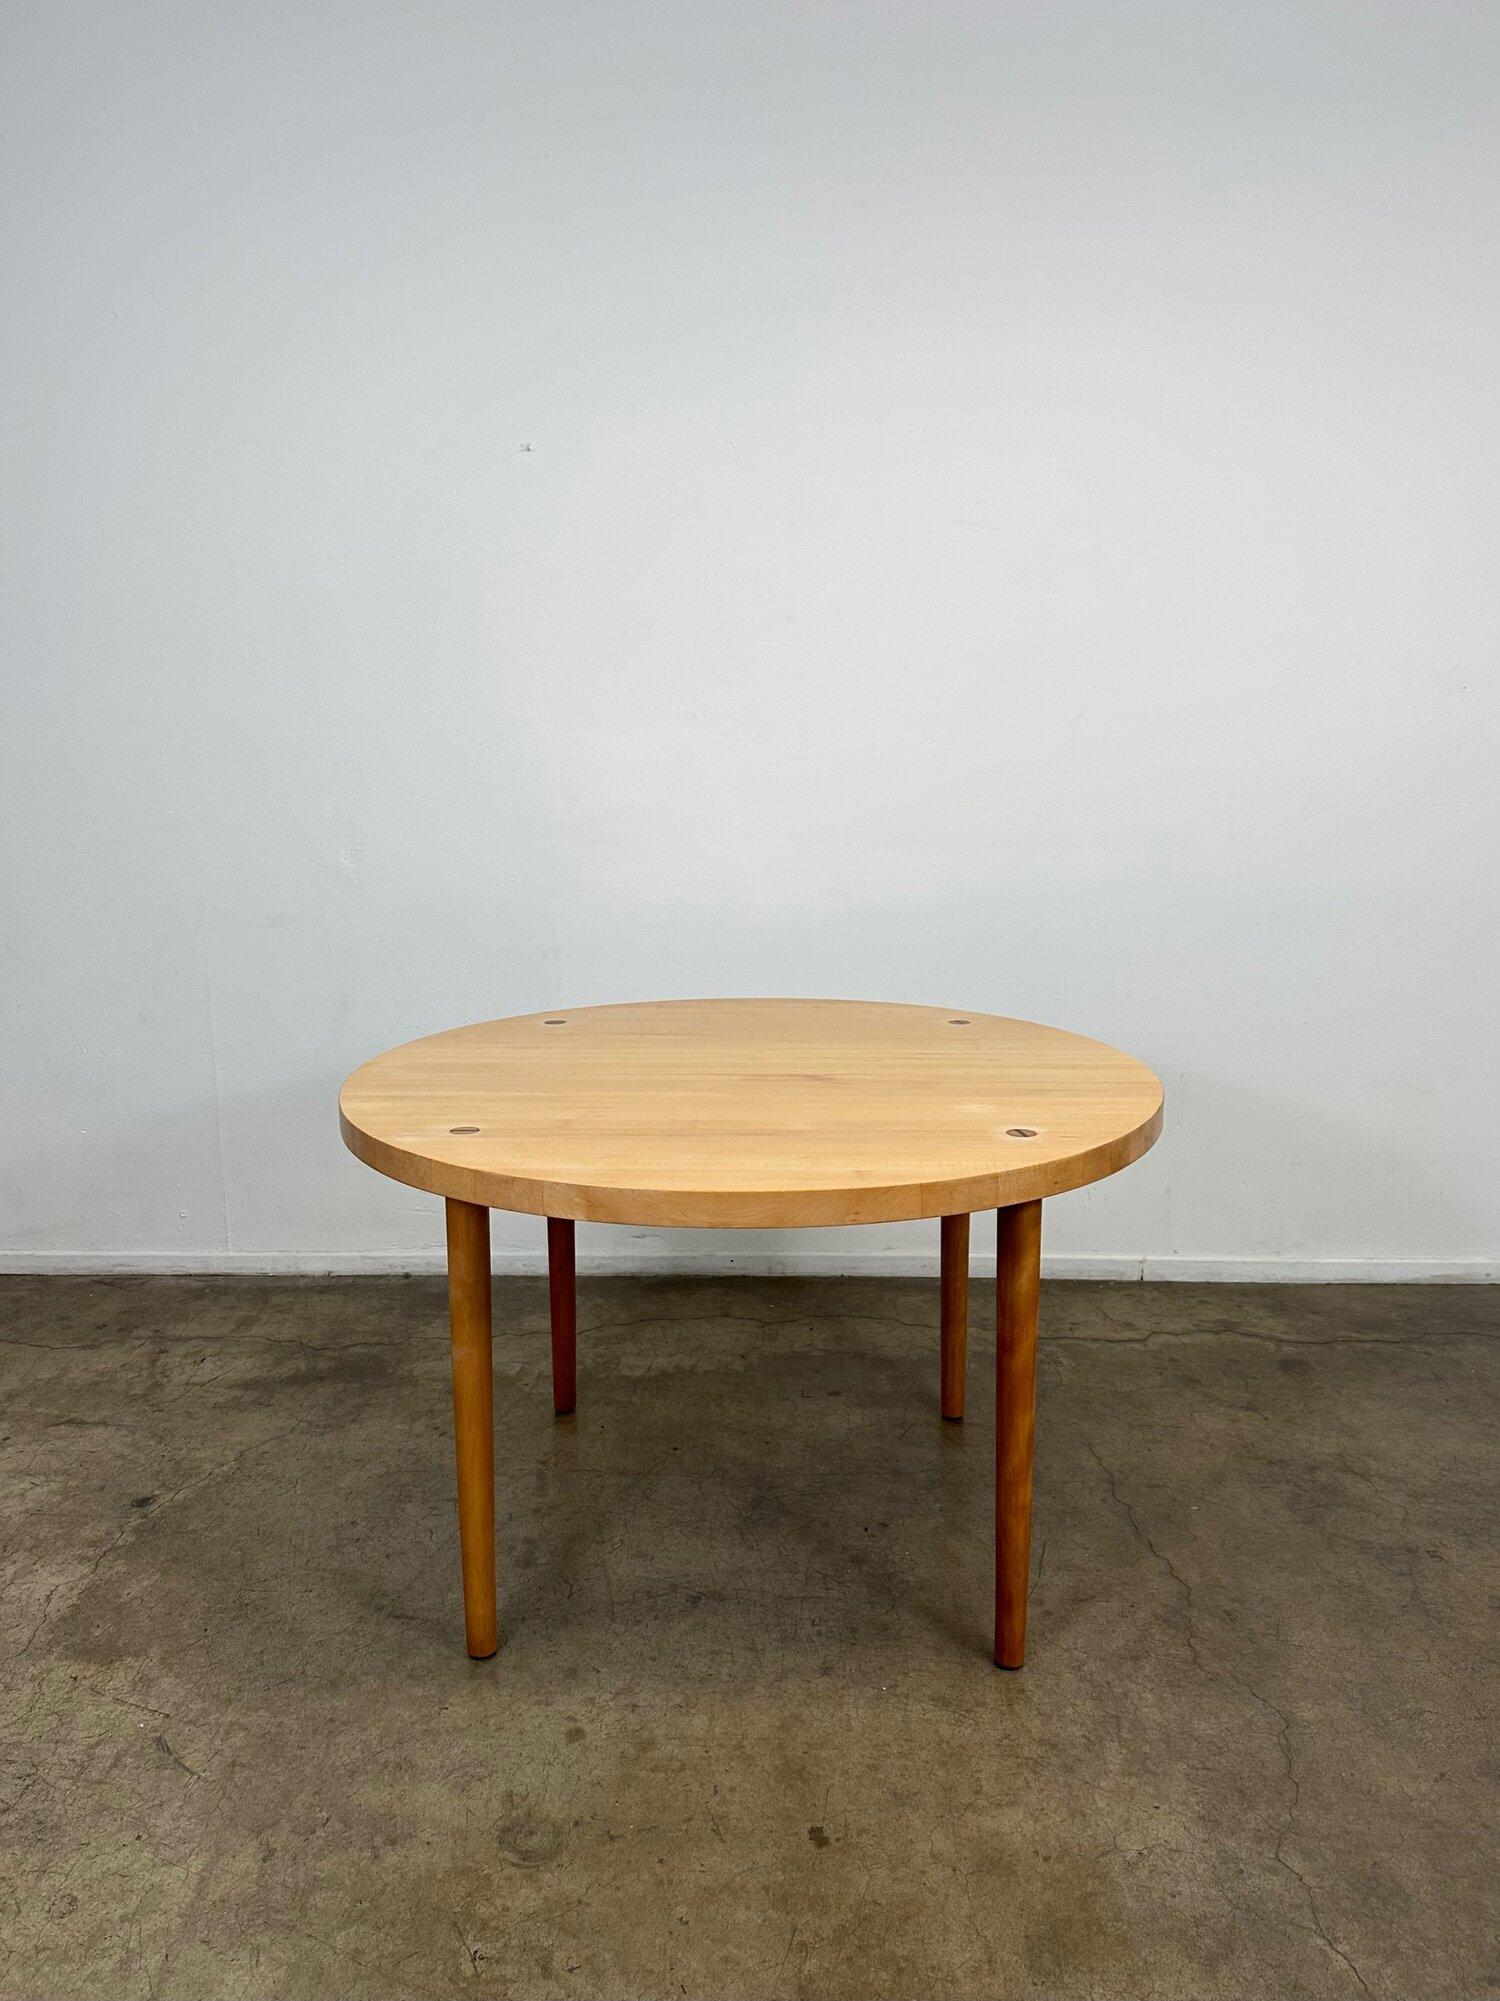 W48 H29.5. KNEE CLEARANCE 27.

Solid maple dining table circa 1960s designed by Claud Bunyard for Design Research. Item offers high quality materials with a minimalistic design. Very subtle inset rosewood on surface adds both a flair of detail and